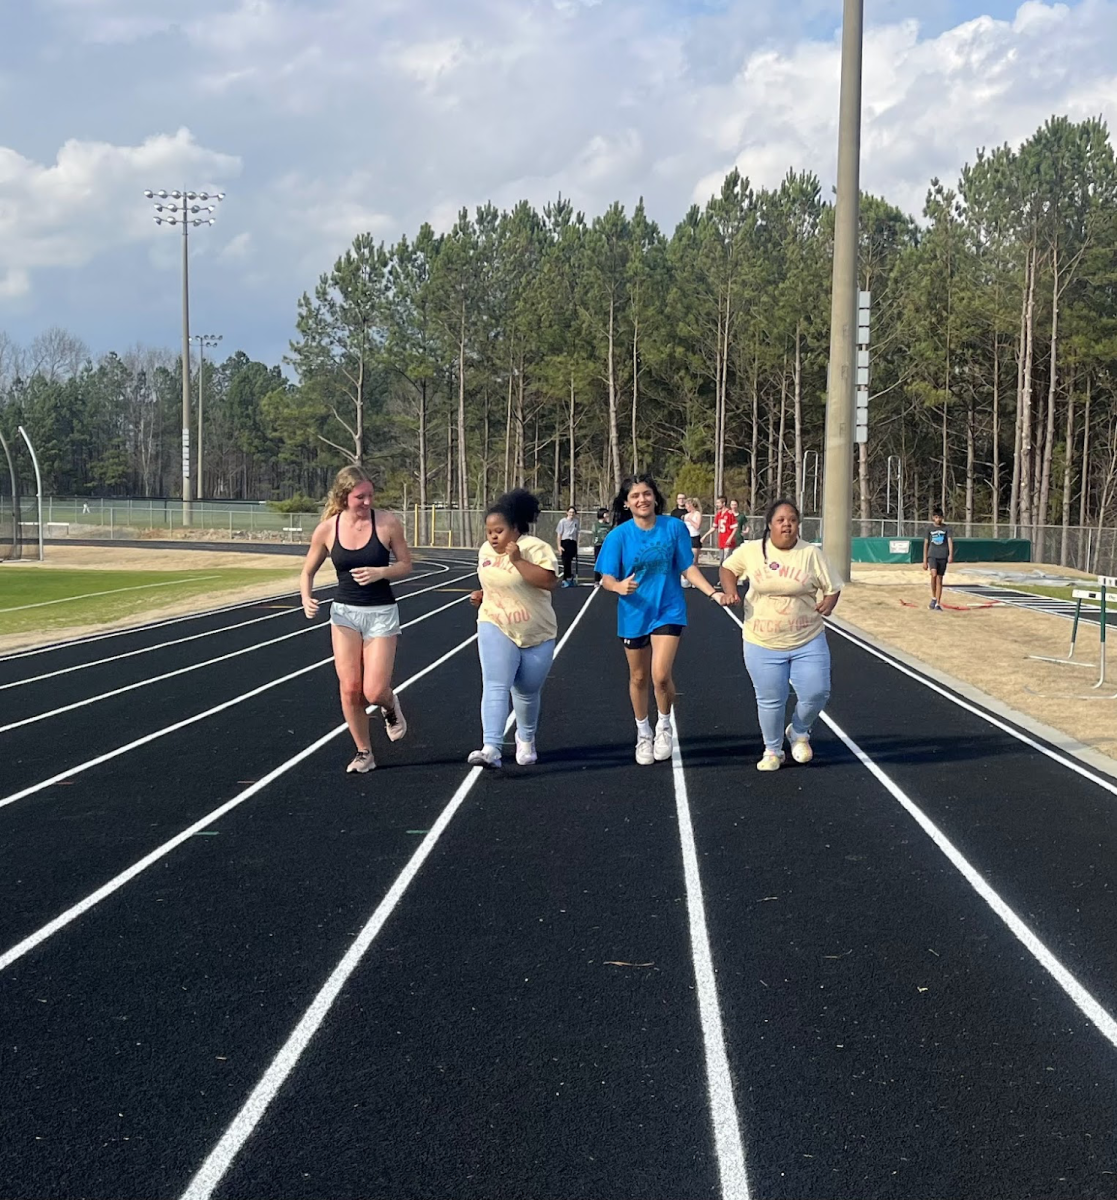 Warming up means a fun jog around the track with friends. With a meet coming up, practice to stay in between the white lines becomes critical. Photo used with permission from Laura Bunn.